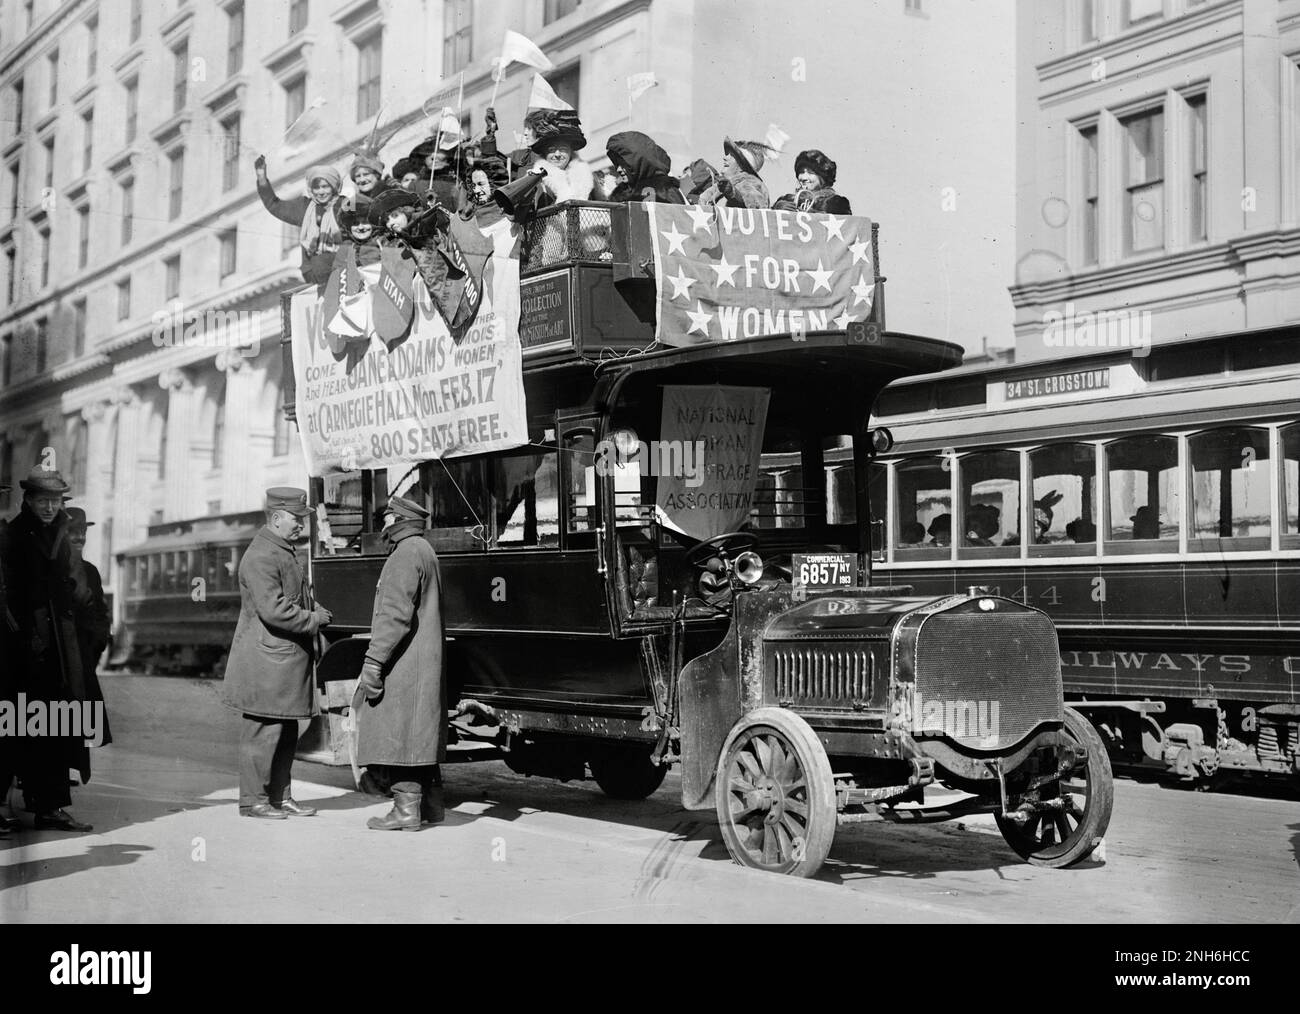 Washington Hikers - Suffragists on an ope top  bus in New York City on their way to Washington - 1913 Stock Photo